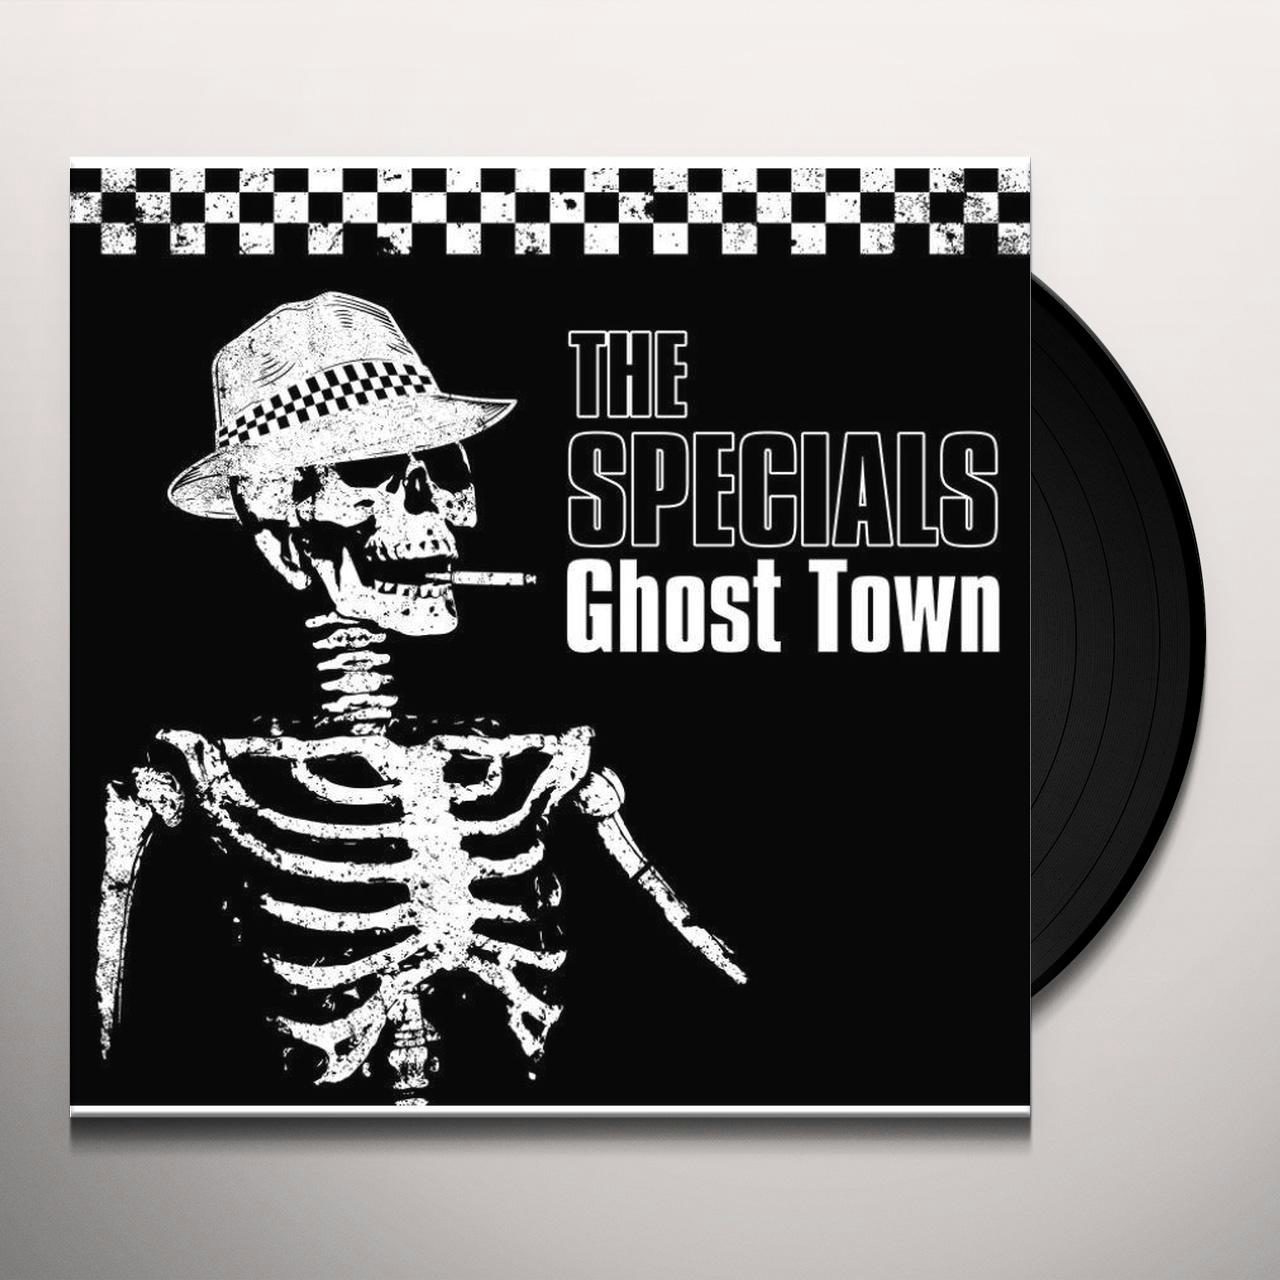 The Specials Shirts, The Specials Merch, The Specials Hoodies, The